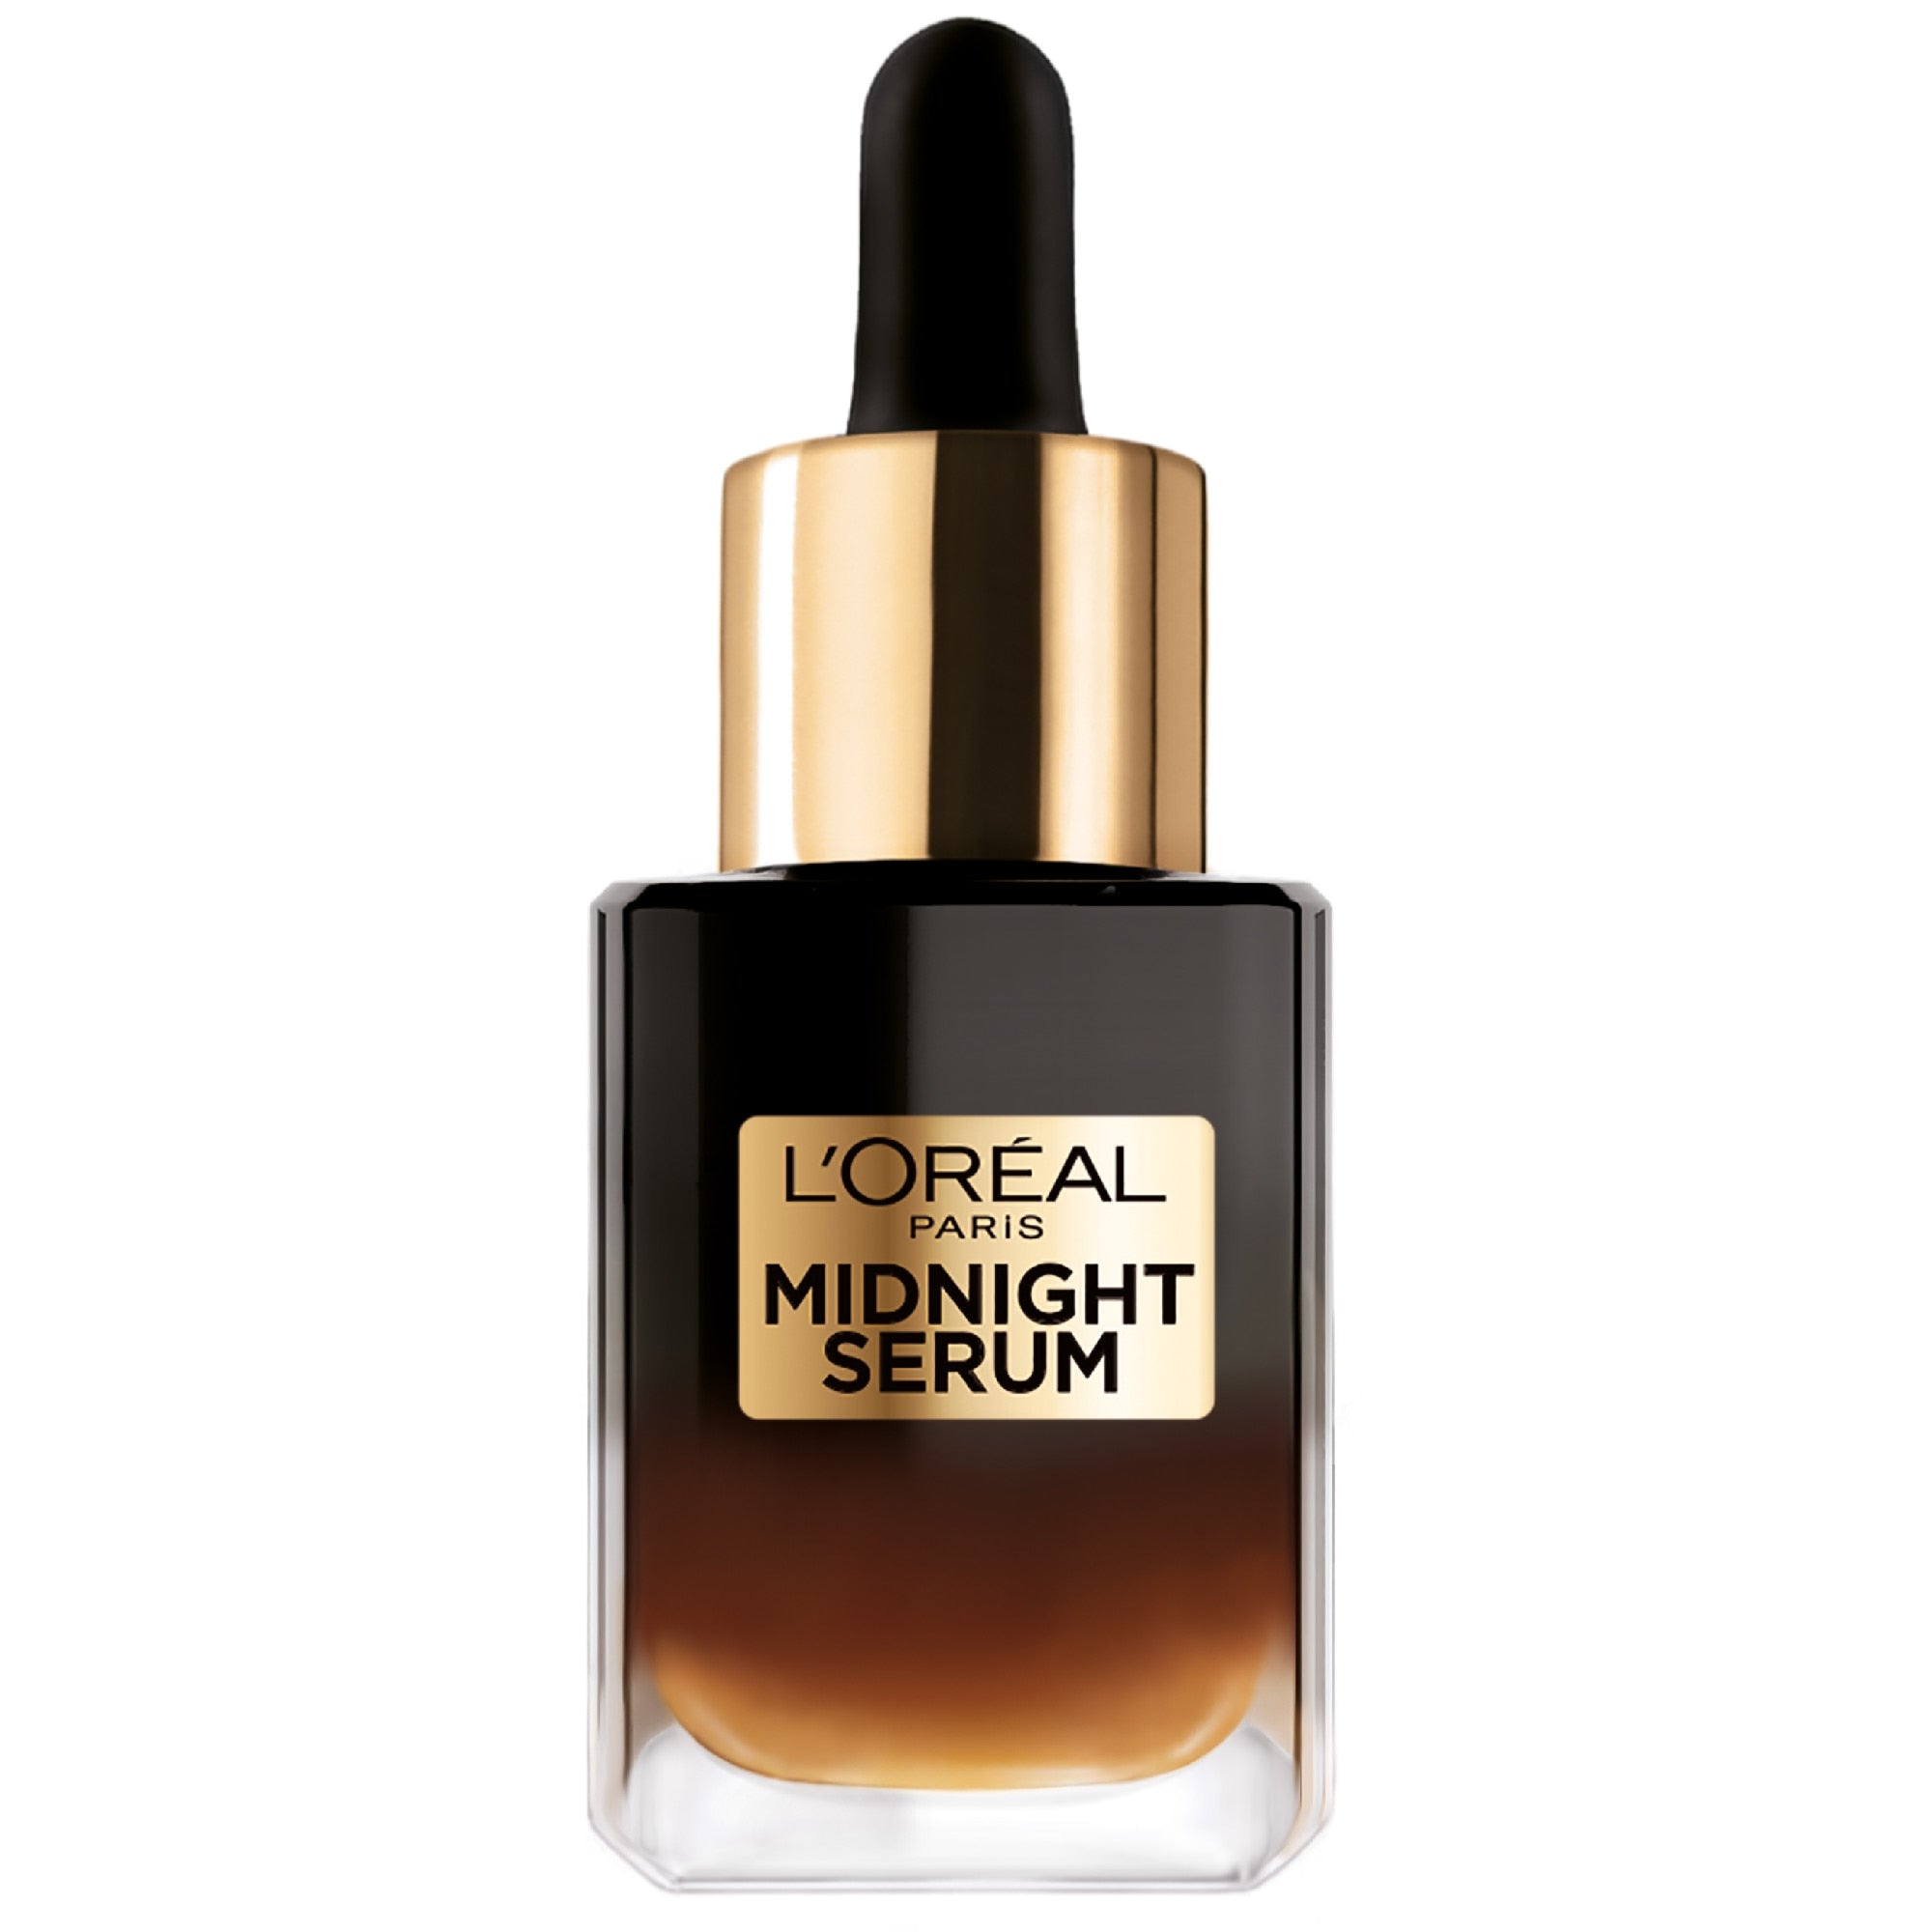 L'Oreal Paris Trial Size Age Perfect Cell Renewal Midnight Serum Anti-Aging Complex, 0.5 oz